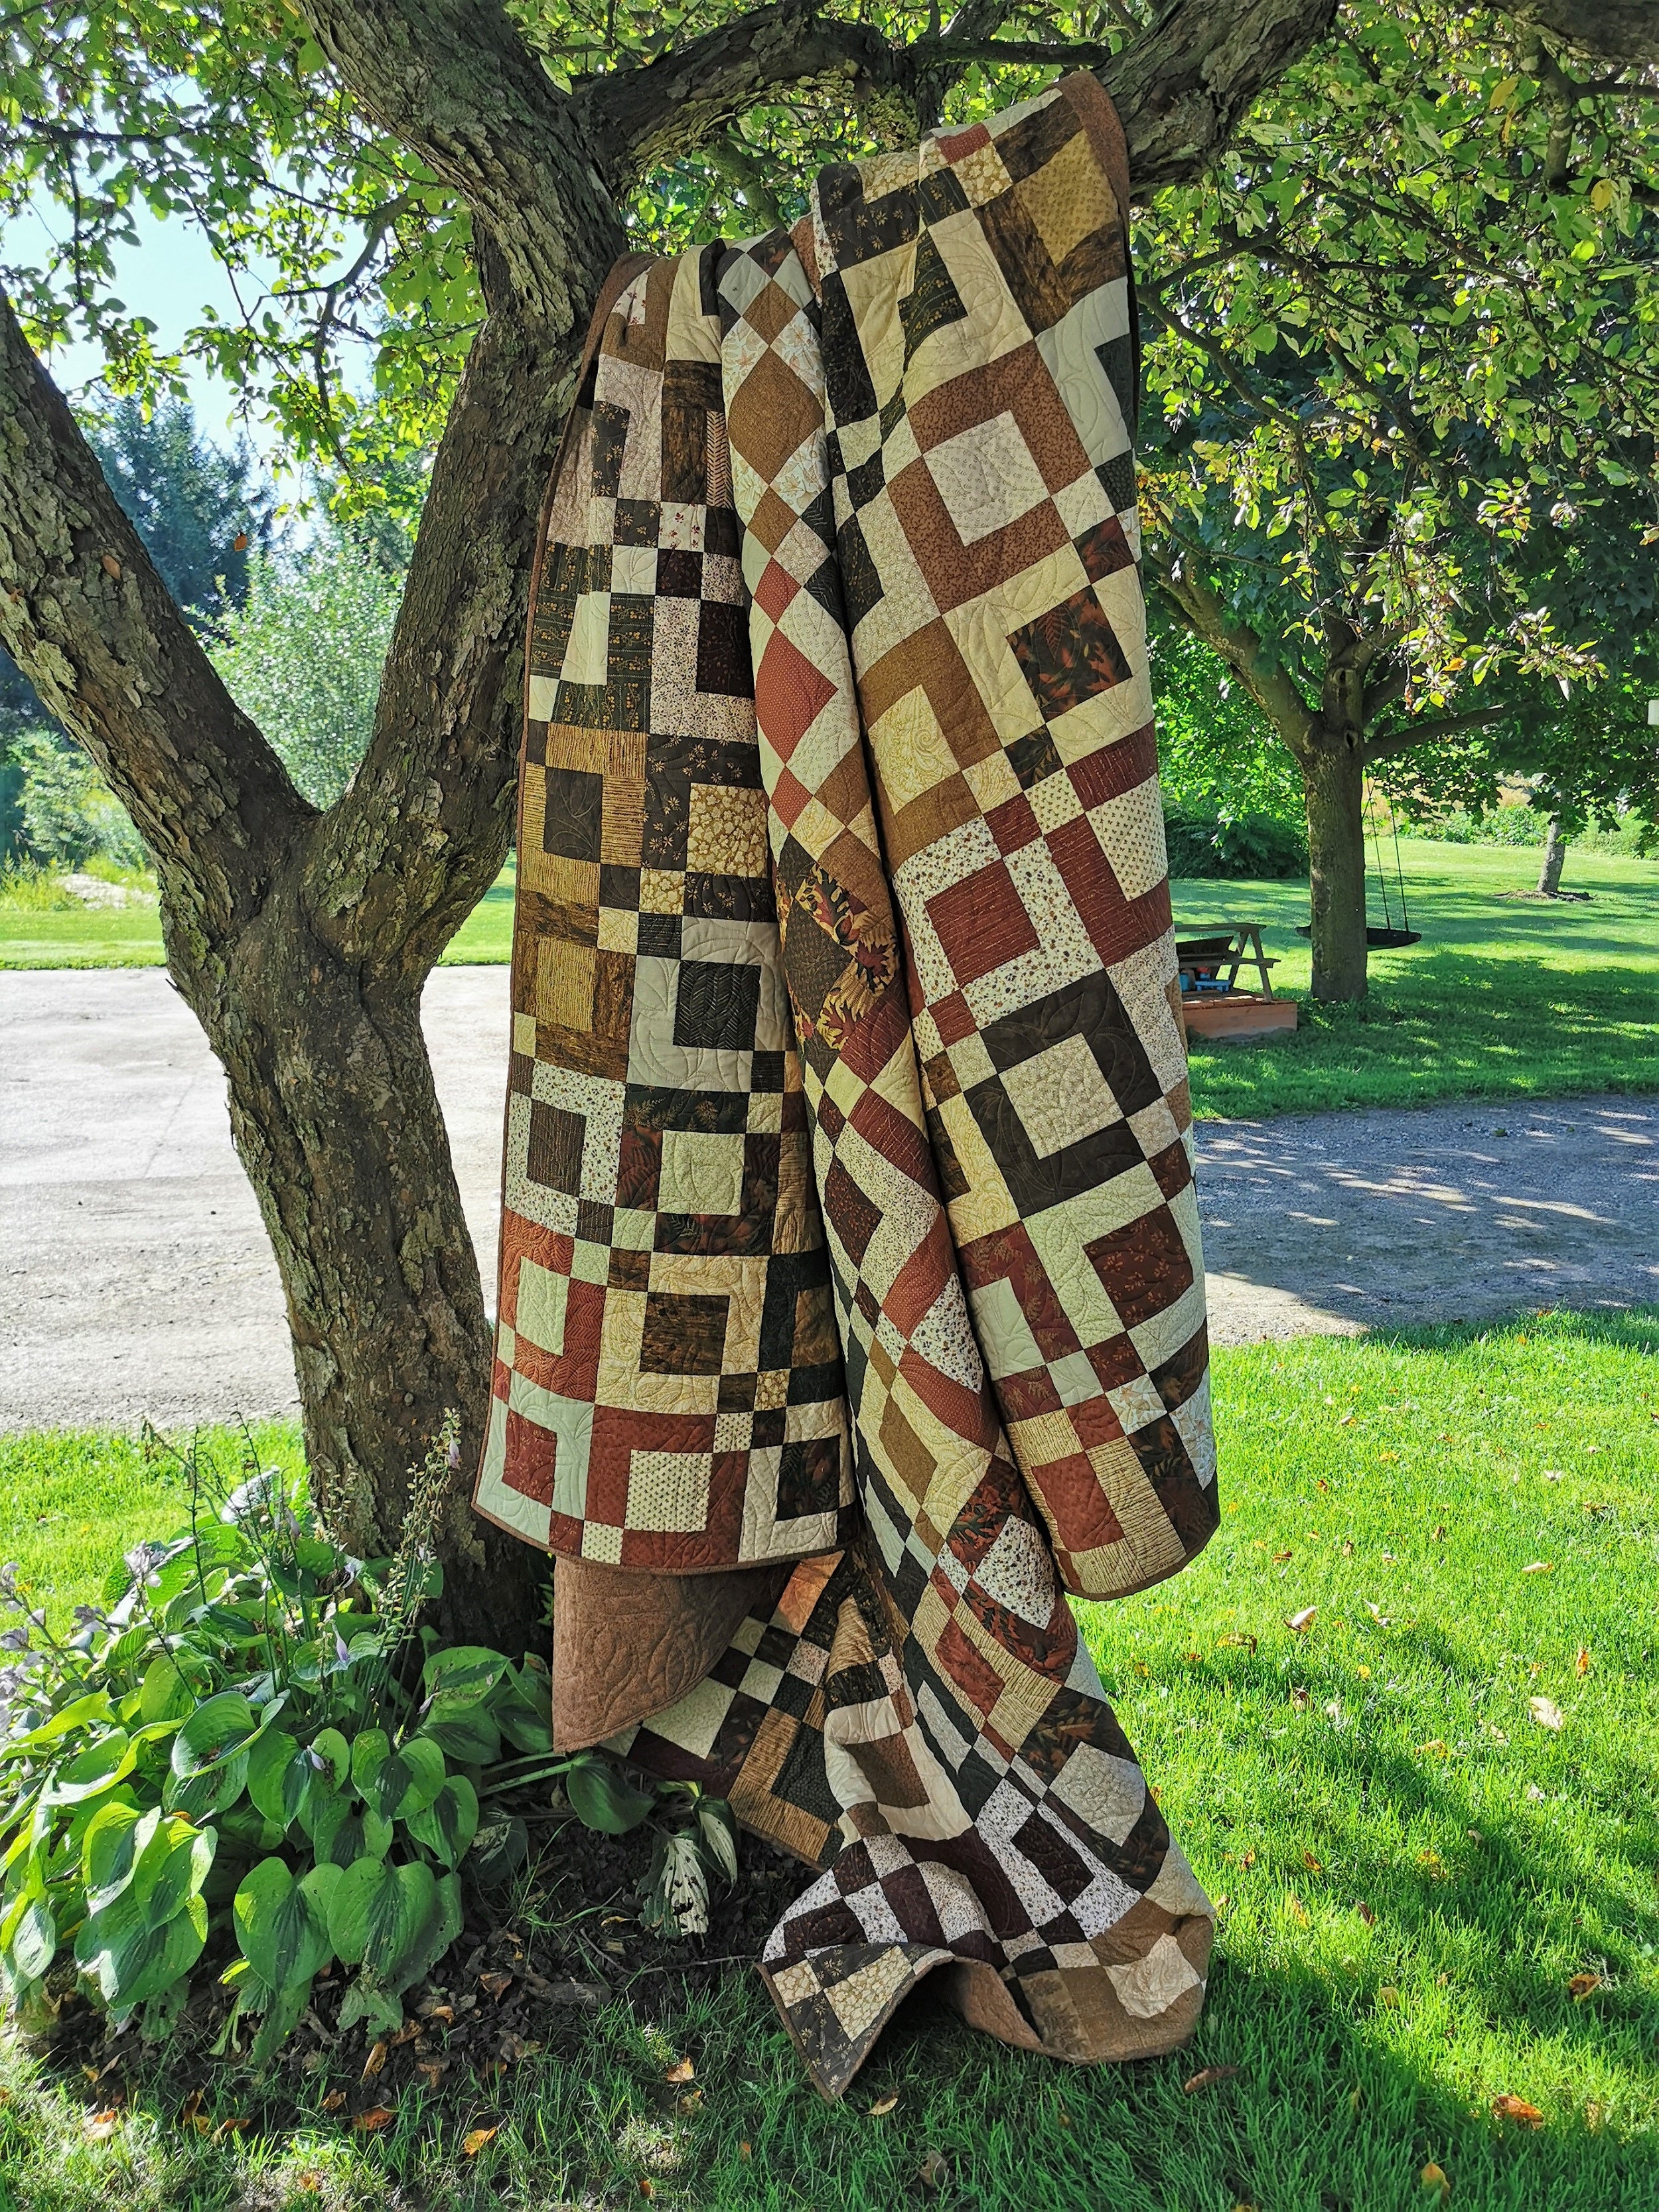 This patchwork queen bed quilt is shown hanging over a tree branch. The rustic colors include brown, green, beige, red, orange, gold. 